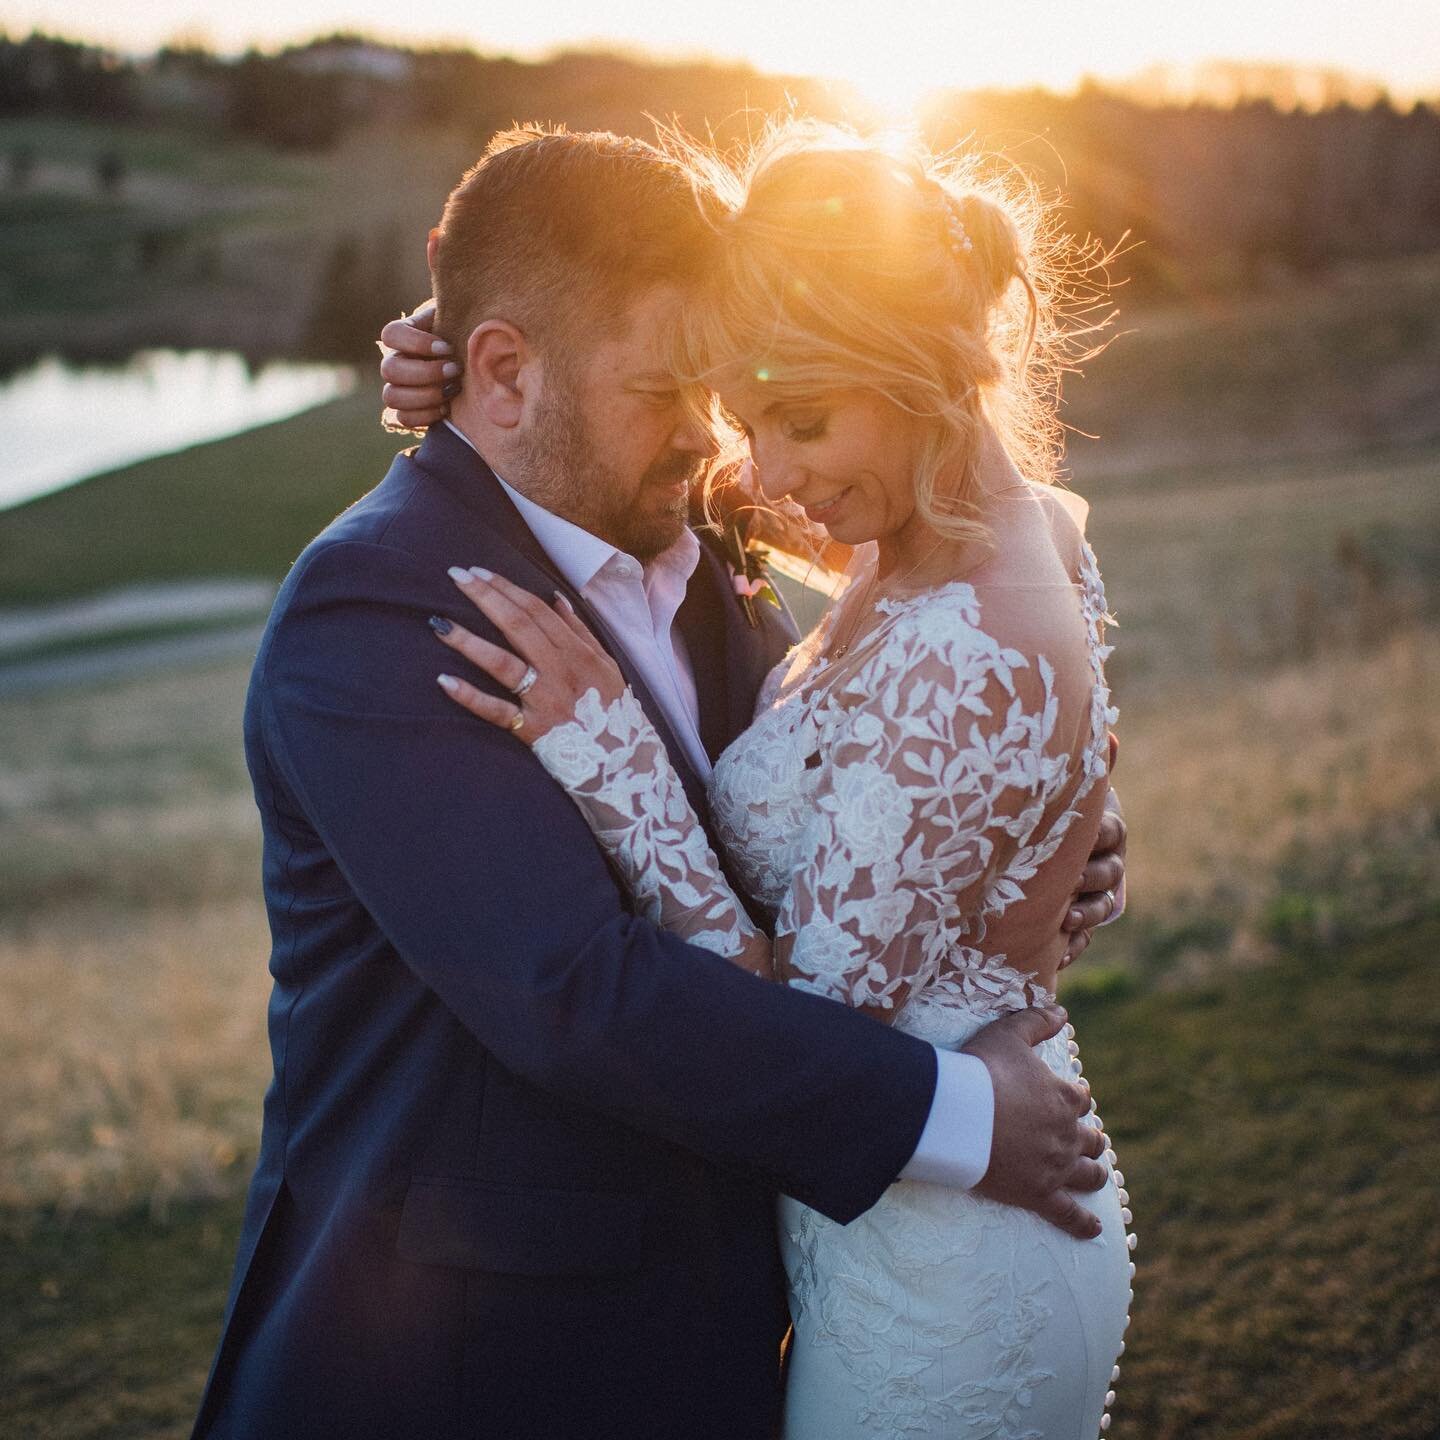 This Bearspaw Golf Course wedding was a day to remember! They had an outdoor ceremony on the 10th tee with an amazing view that extended to the Rockies followed a stunning reception!

To see more about their full wedding day, check out our blog. Link